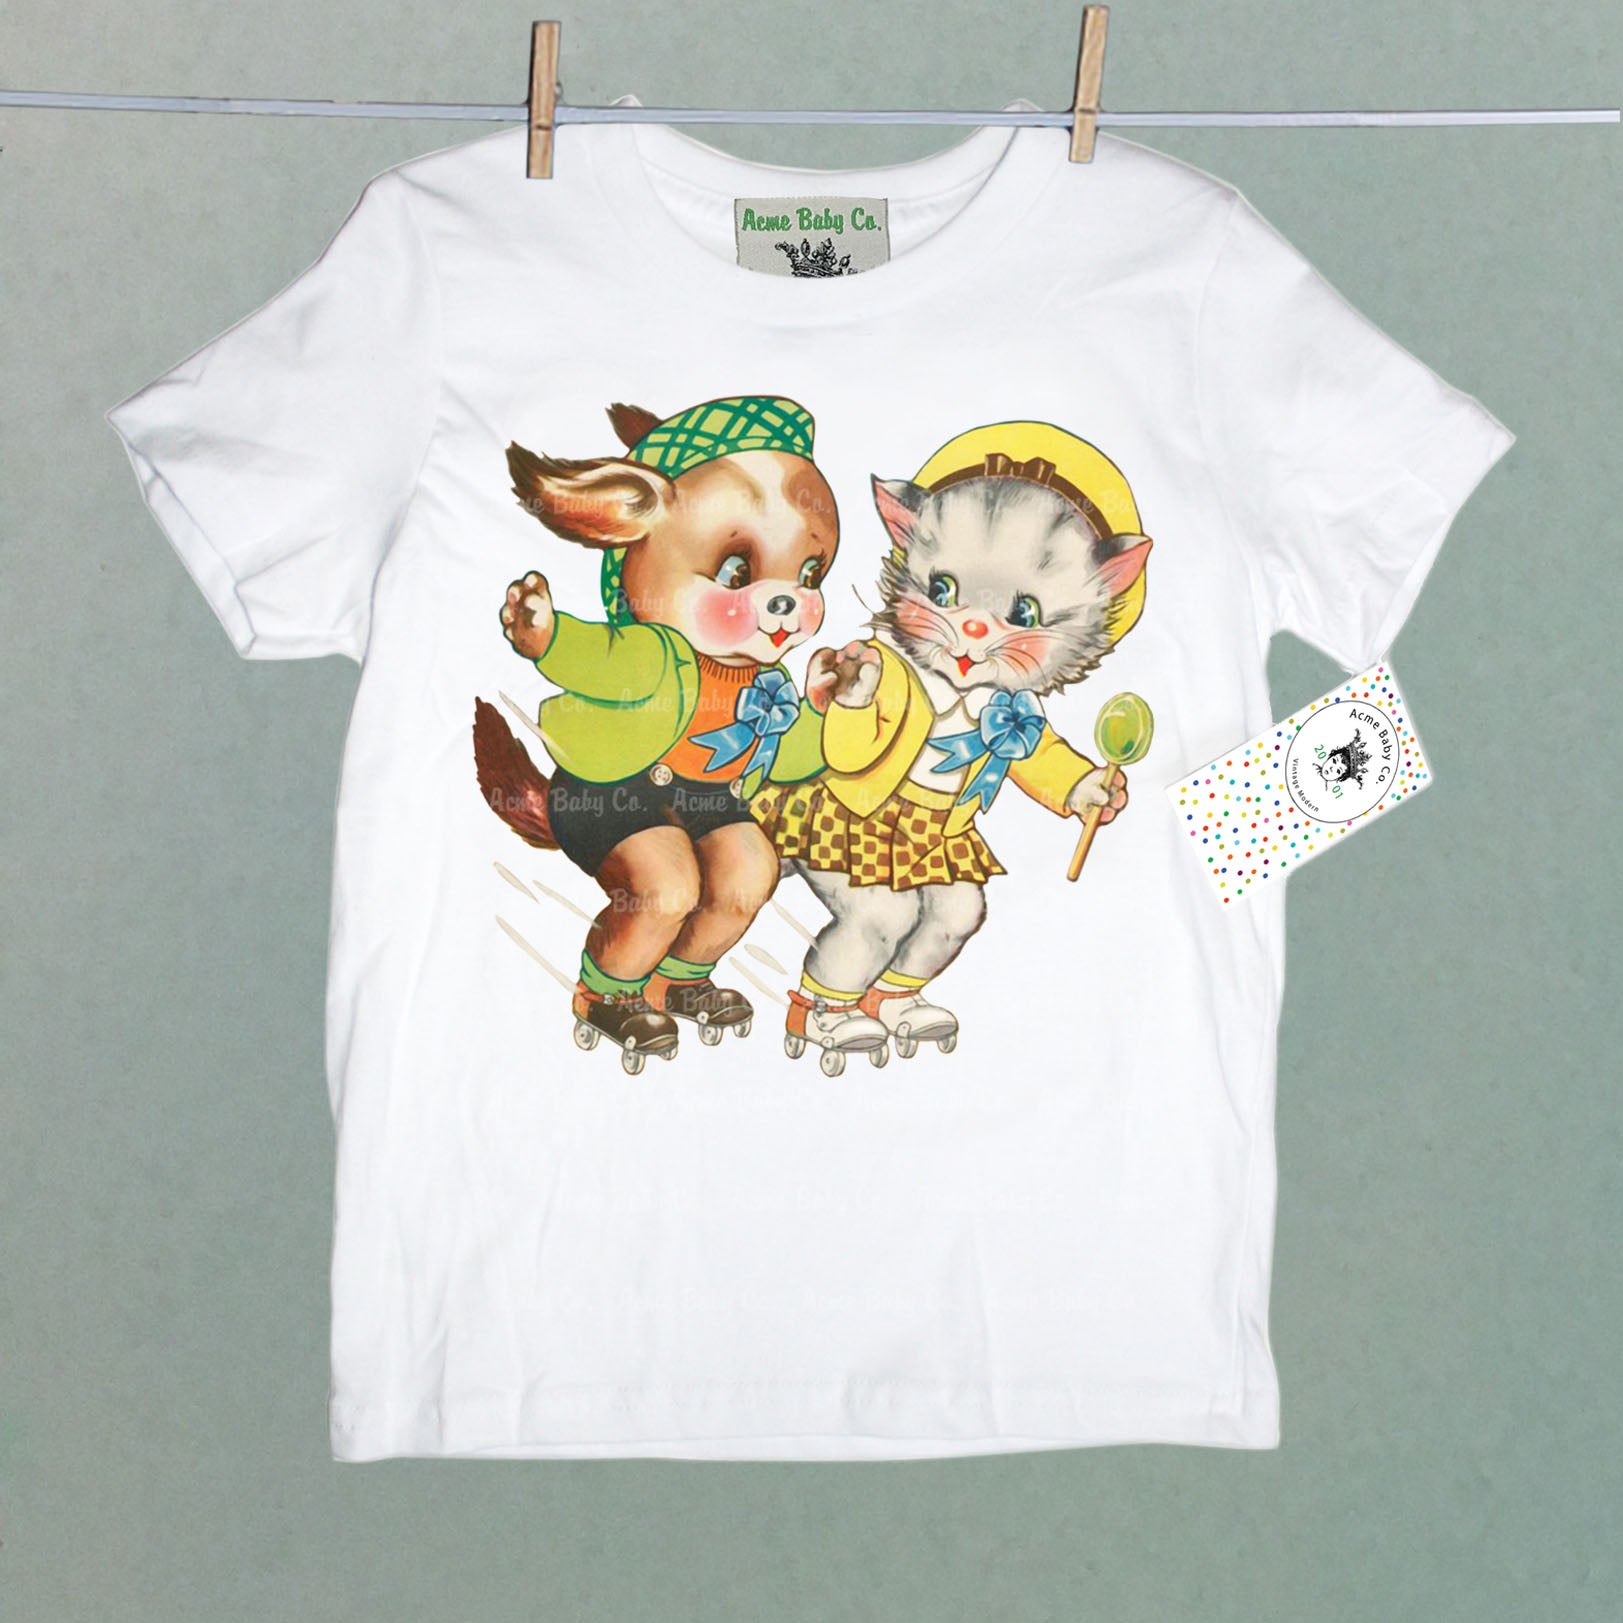 Roller Skating Kitty and Puppy Children's Shirt